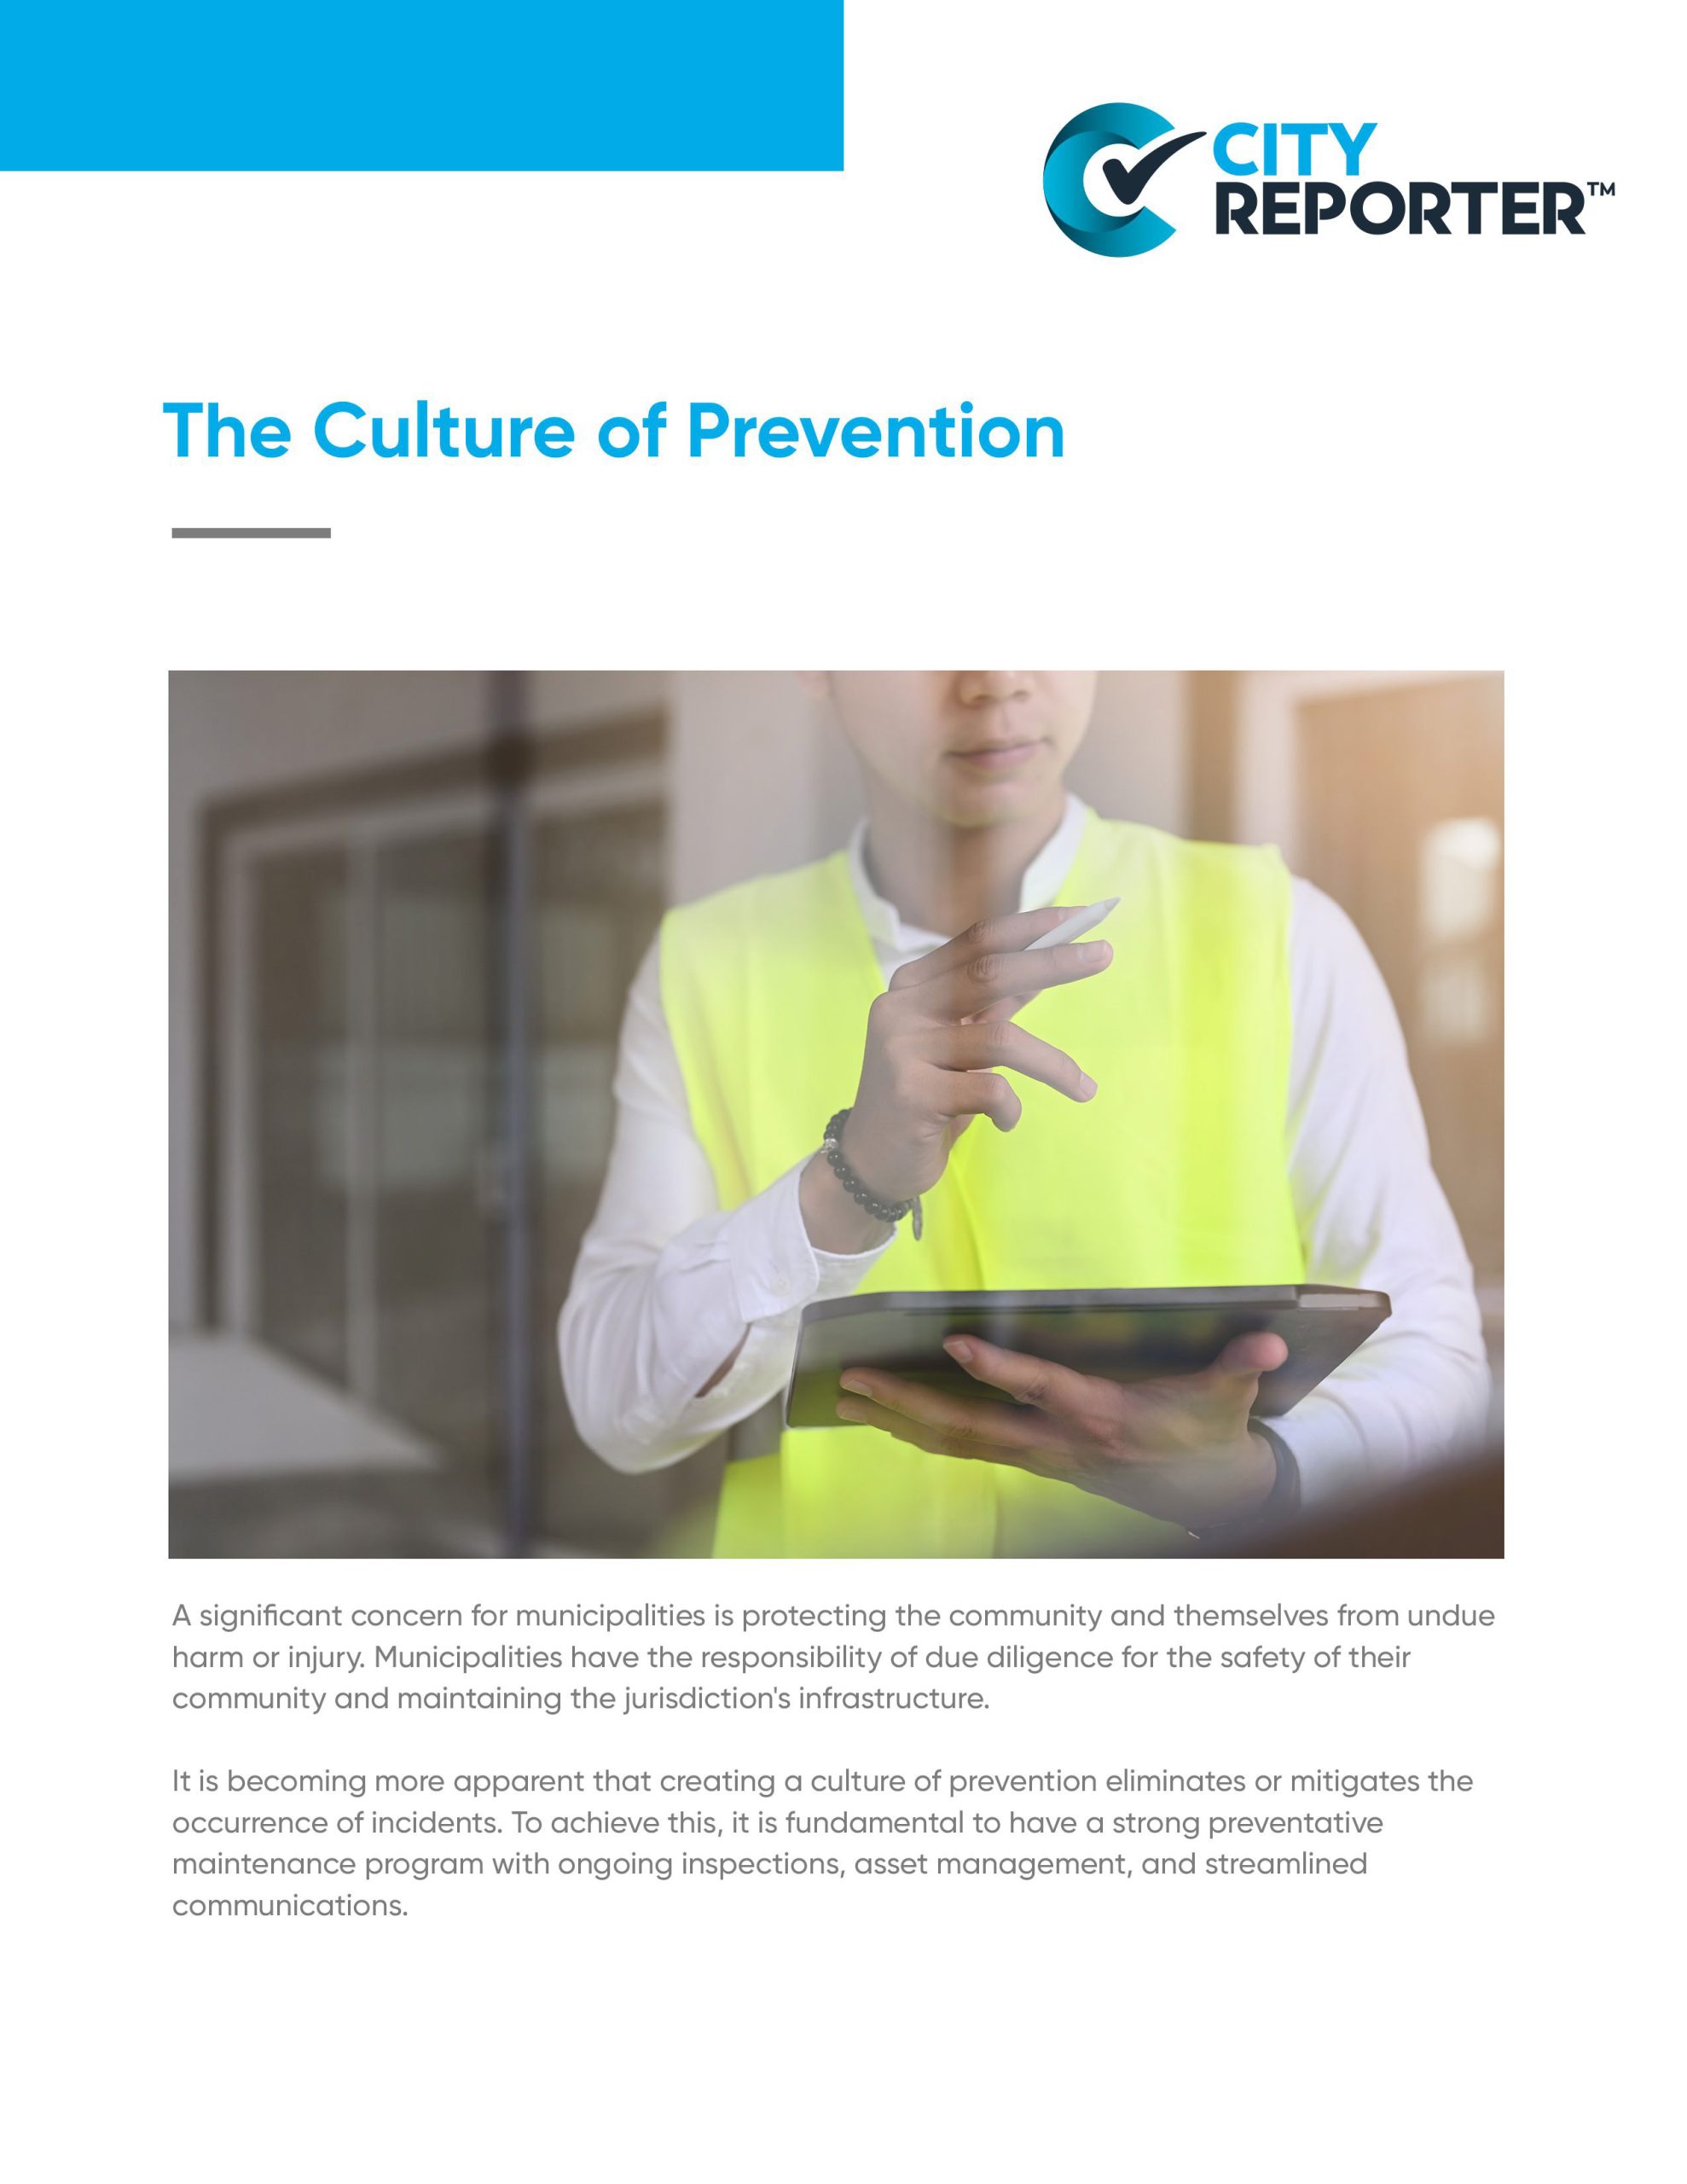 The first page of CityReporter's document - The Culture of Prevention